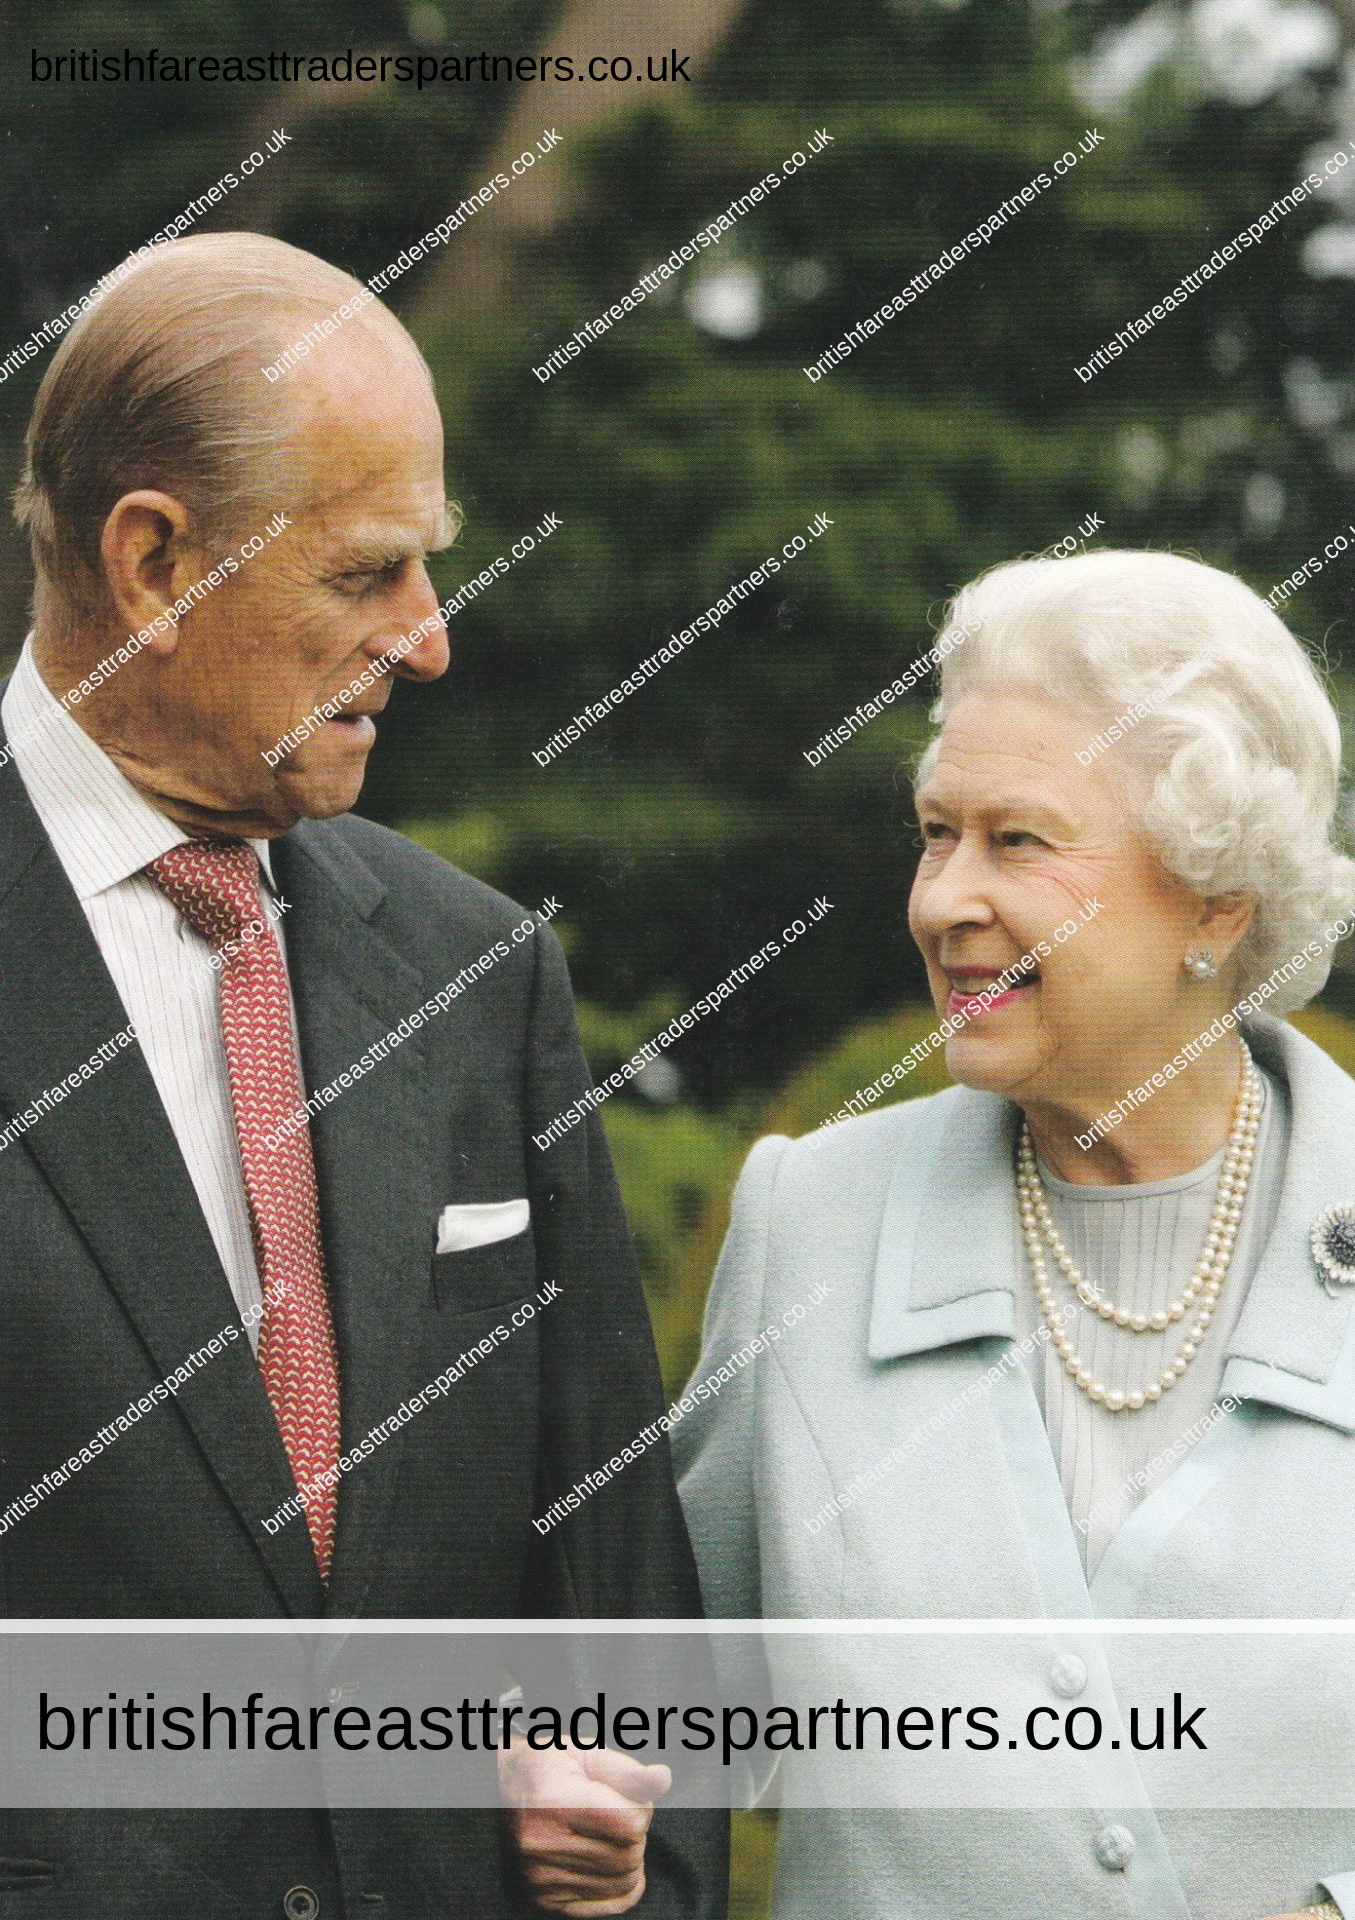 “HER MAJESTY THE QUEEN AND HIS ROYAL HIGHNESS THE DUKE OF EDINBURGH” SANDRINGHAM ESTATE POSTCARD UK ROYALTY COLLECTABLES | MEMORABILIA | POSTCARDS | PAPER & EPHEMERA | SOCIETY |  BRITISH | LIFESTYLE | CULTURE |  FASHION | HISTORY | HERITAGE